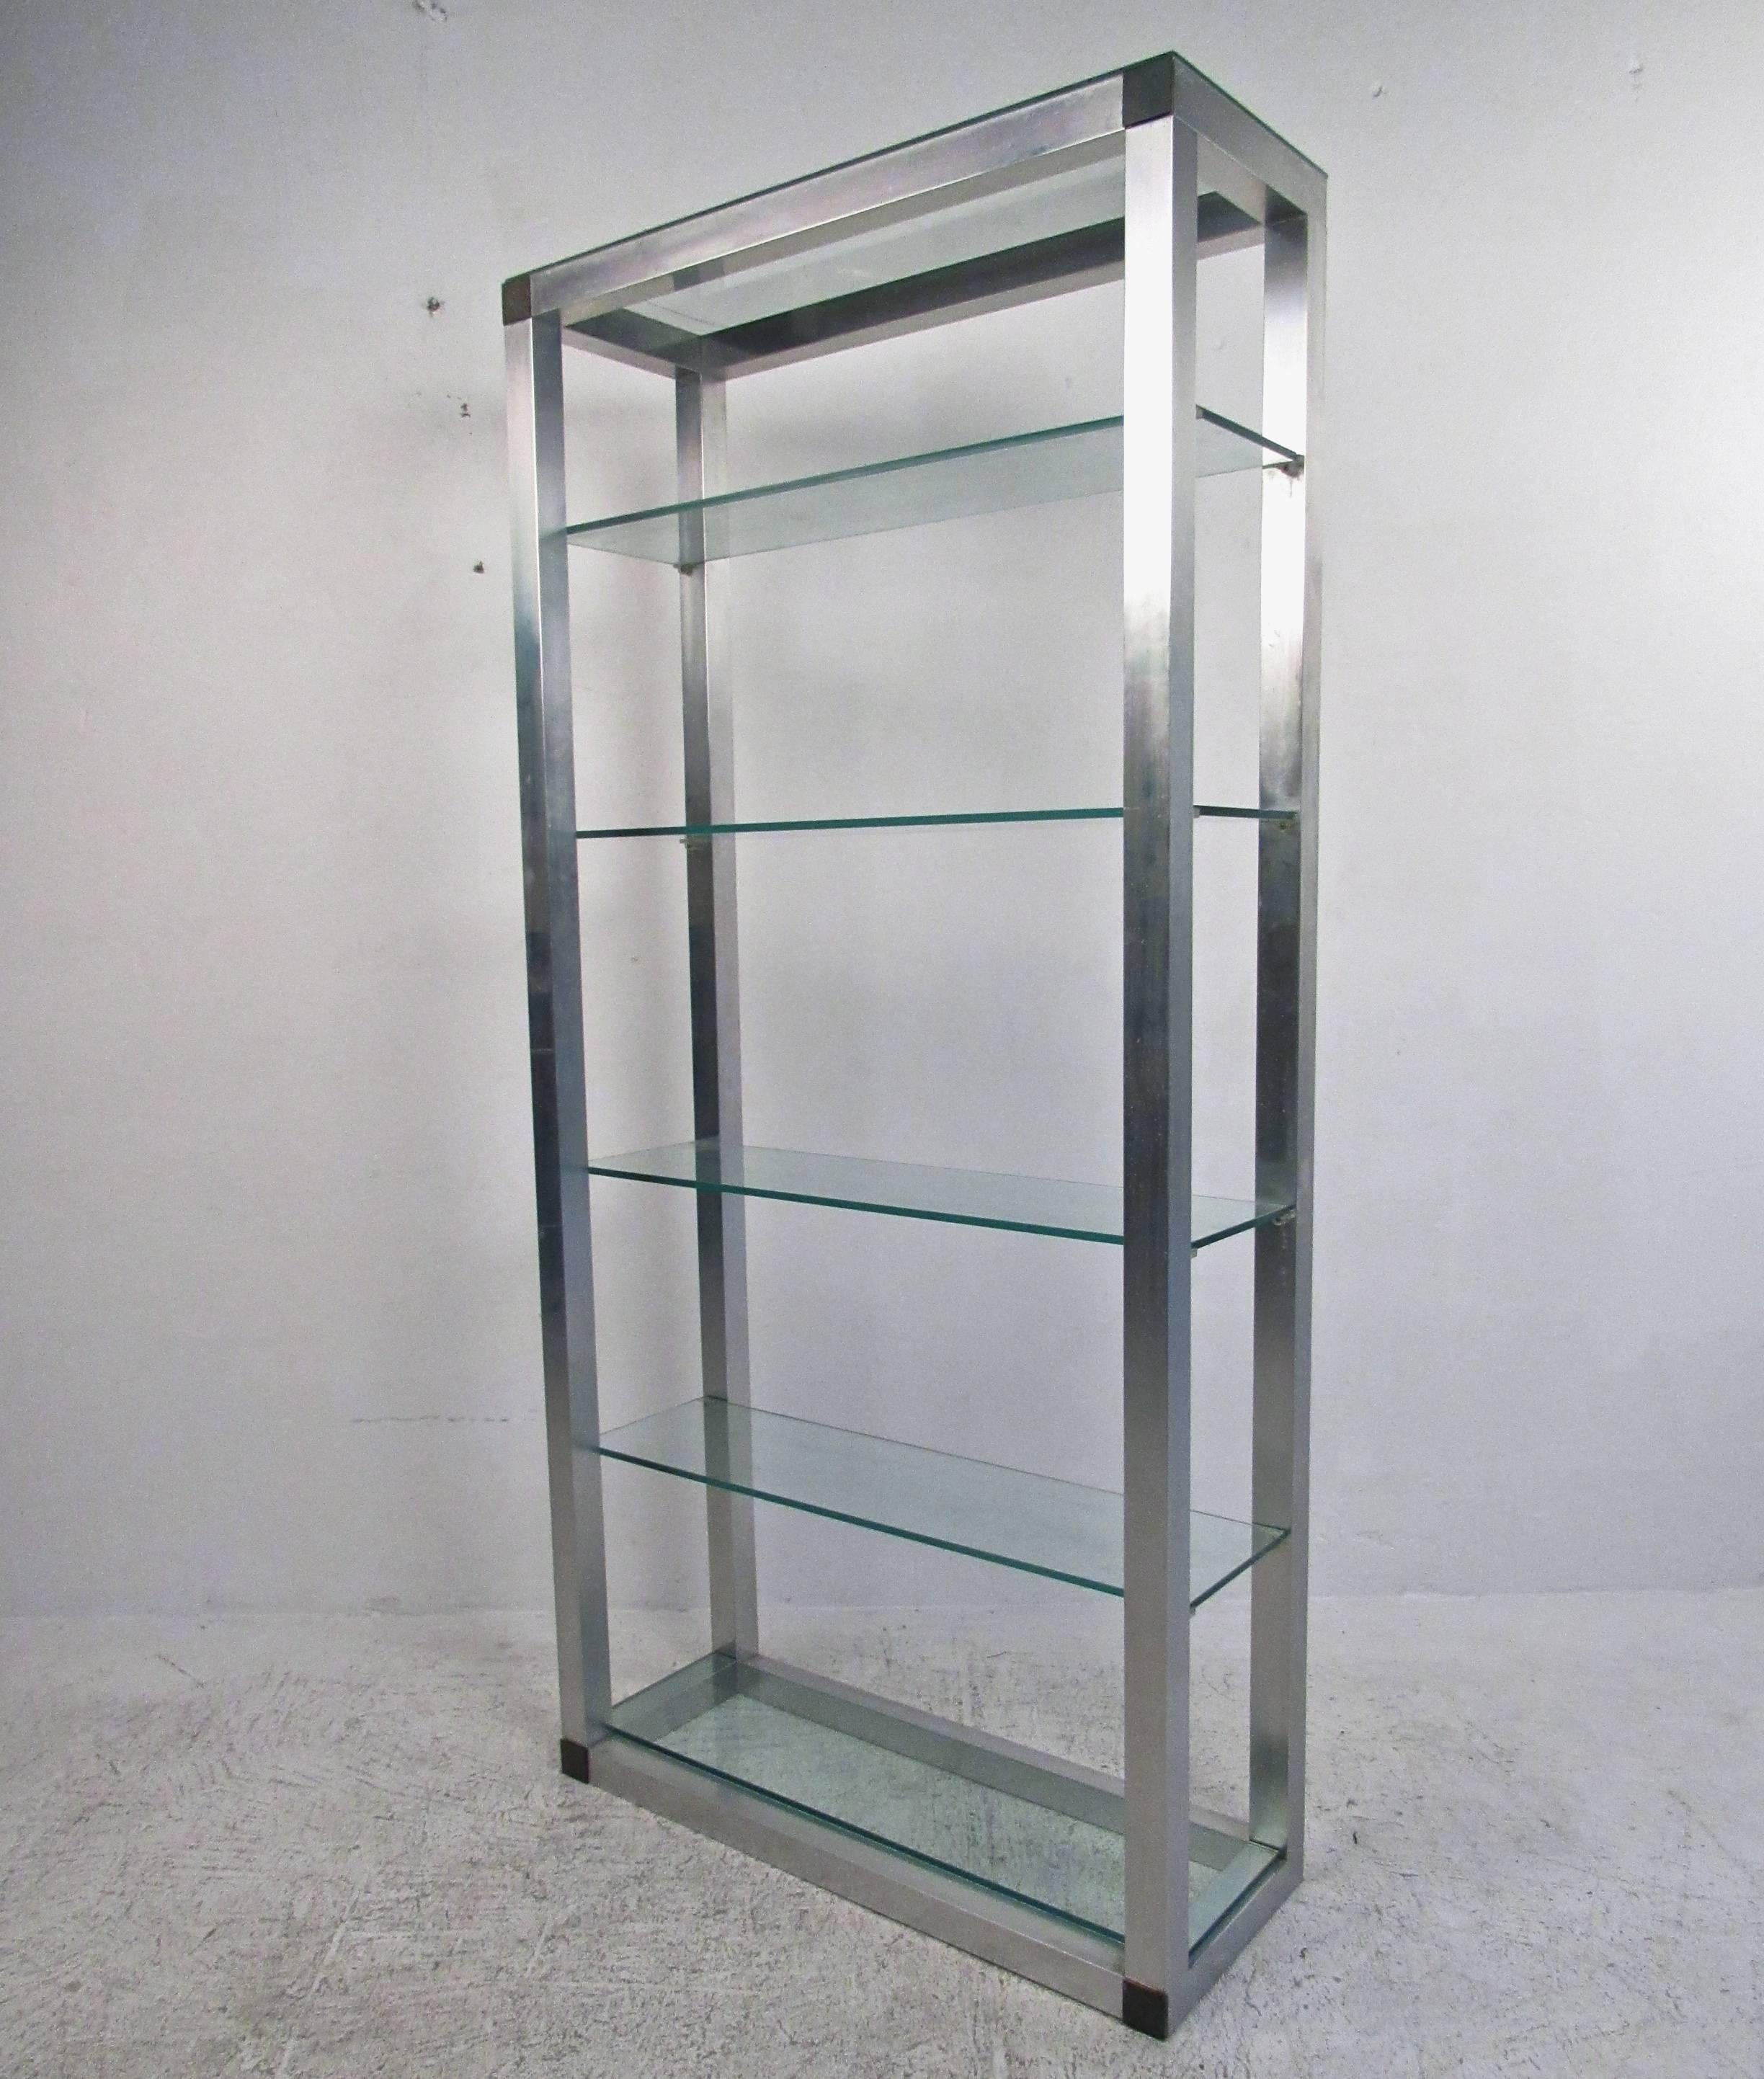 This matching pair of vintage display shelves make an ideal storage shelving system for a variety of interiors. Aluminum finish with corner trim is outfitted with thick glass shelves. Mid-Century Modern style meets plenty of display or storage space